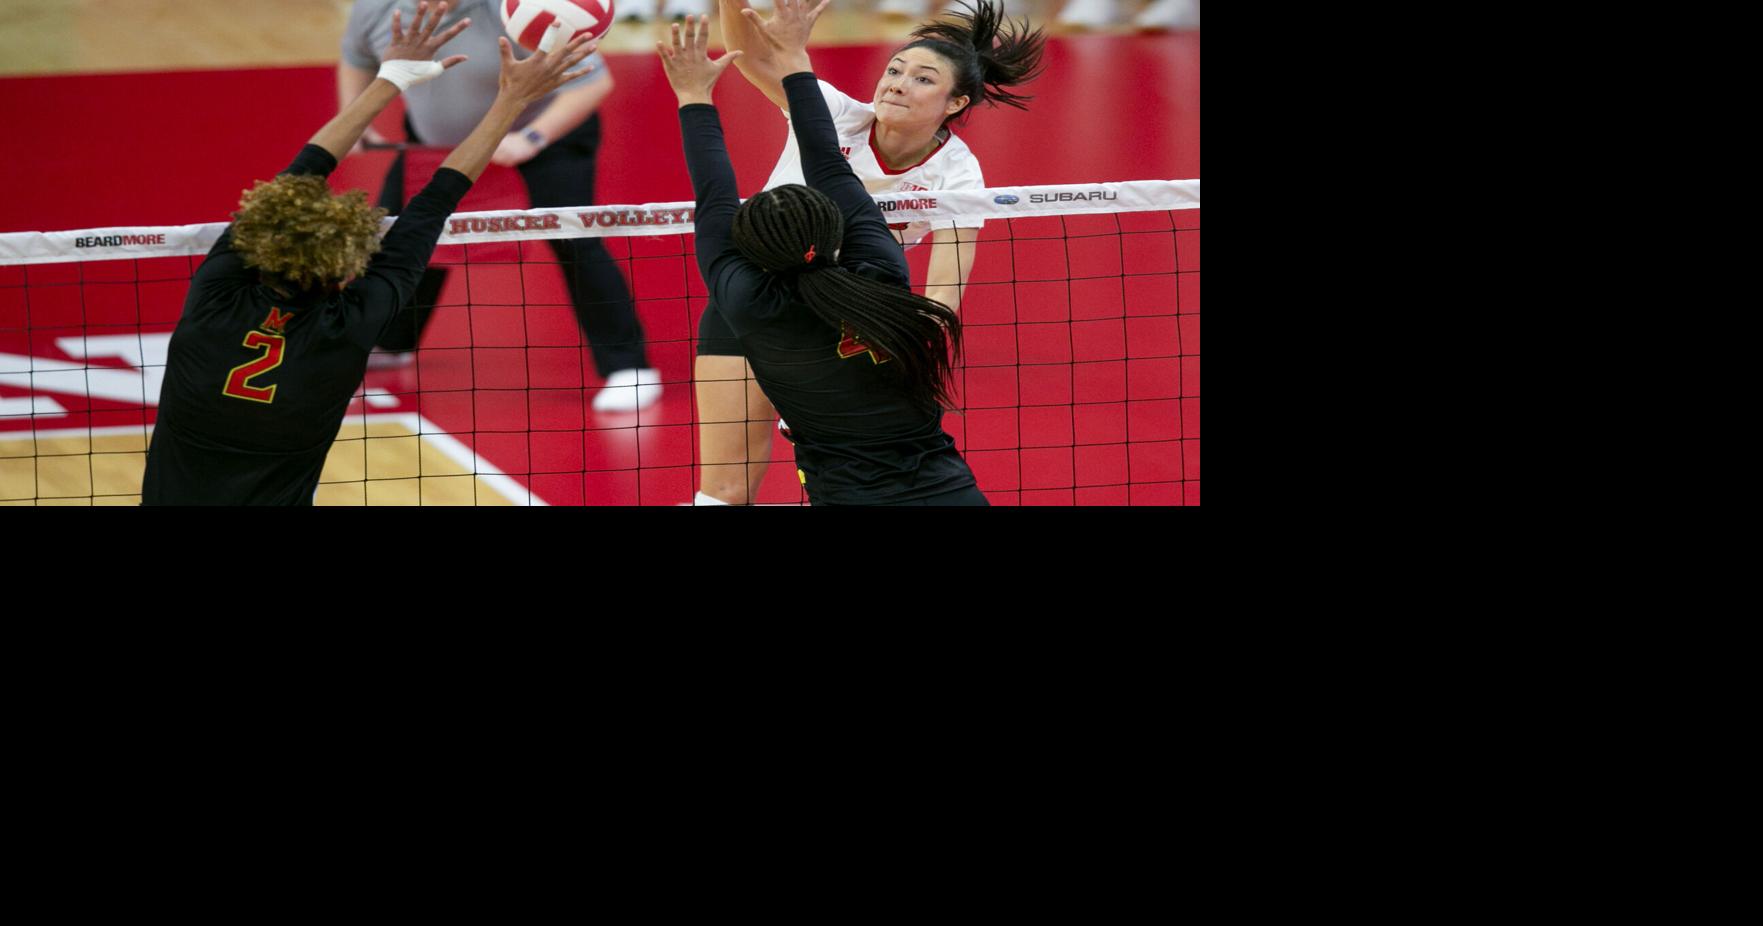 Husker volleyball makes an electrifying return in Red/White scrimmage